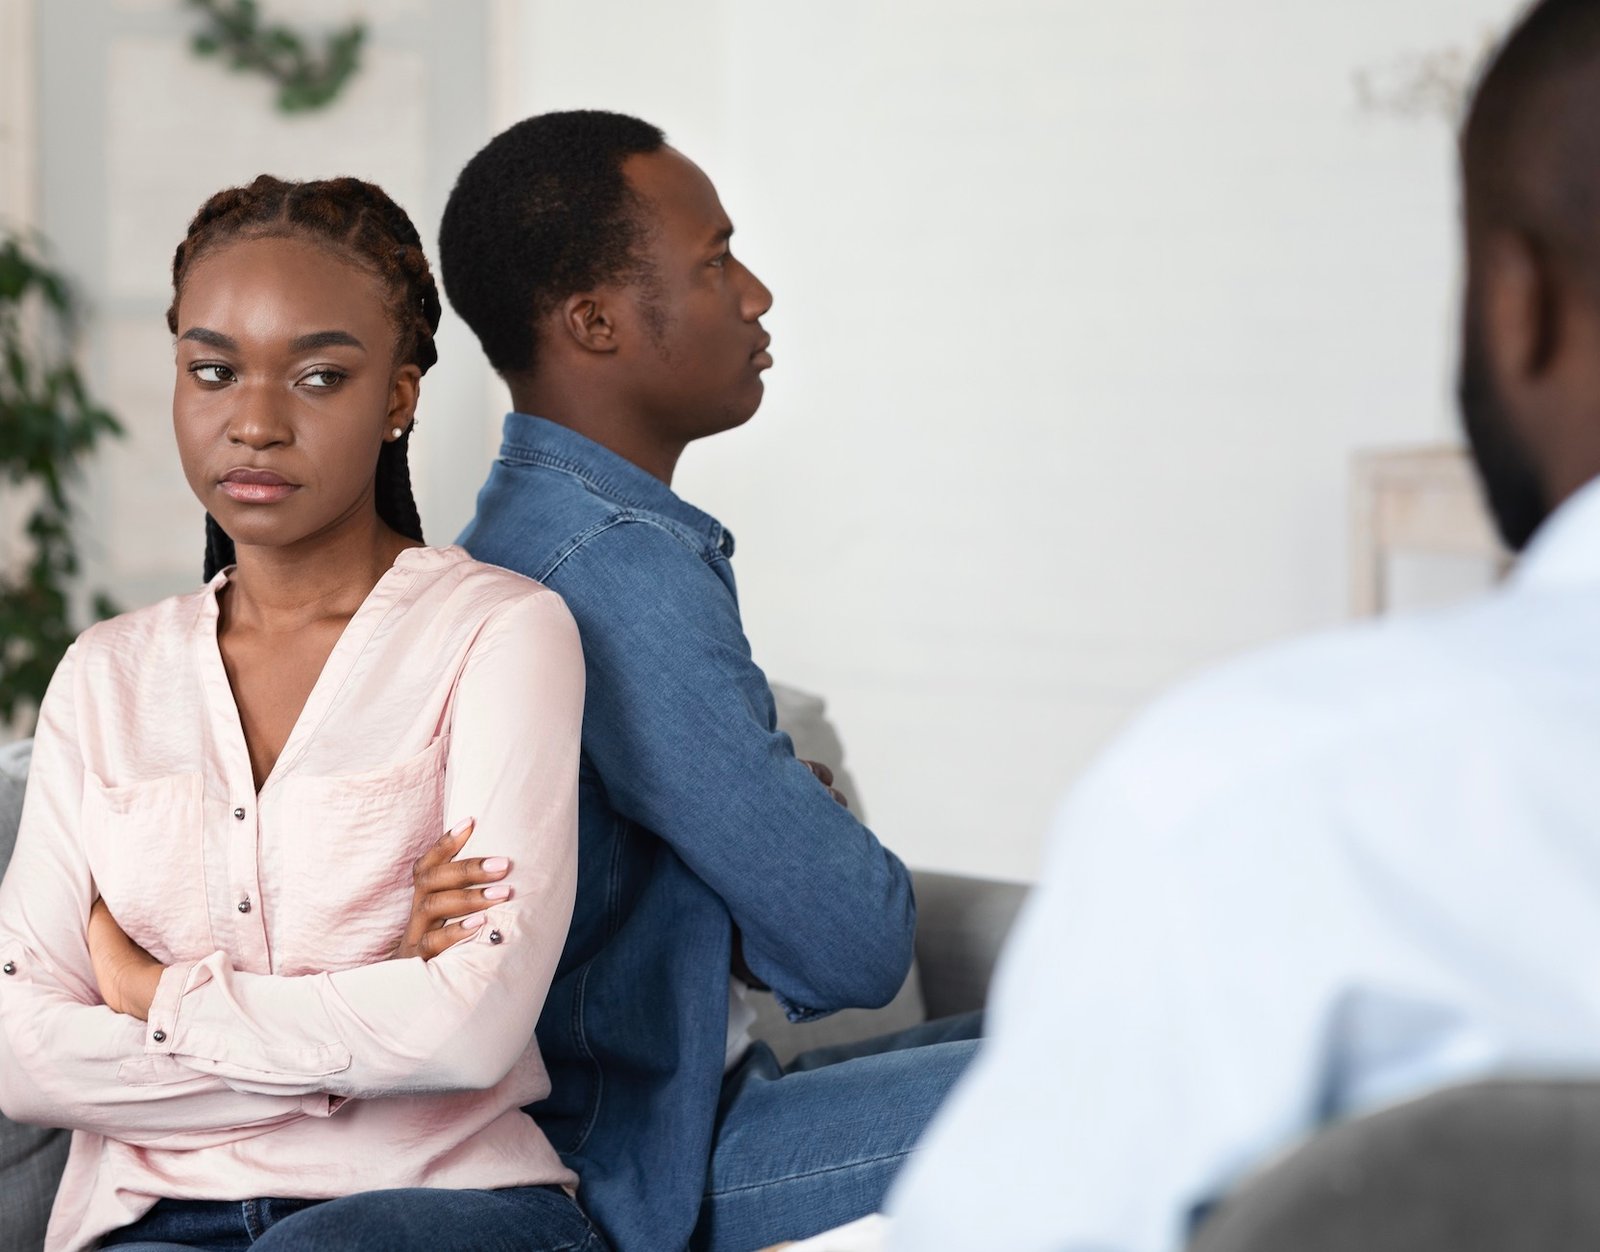 Legal Reasons for Divorce in South Africa